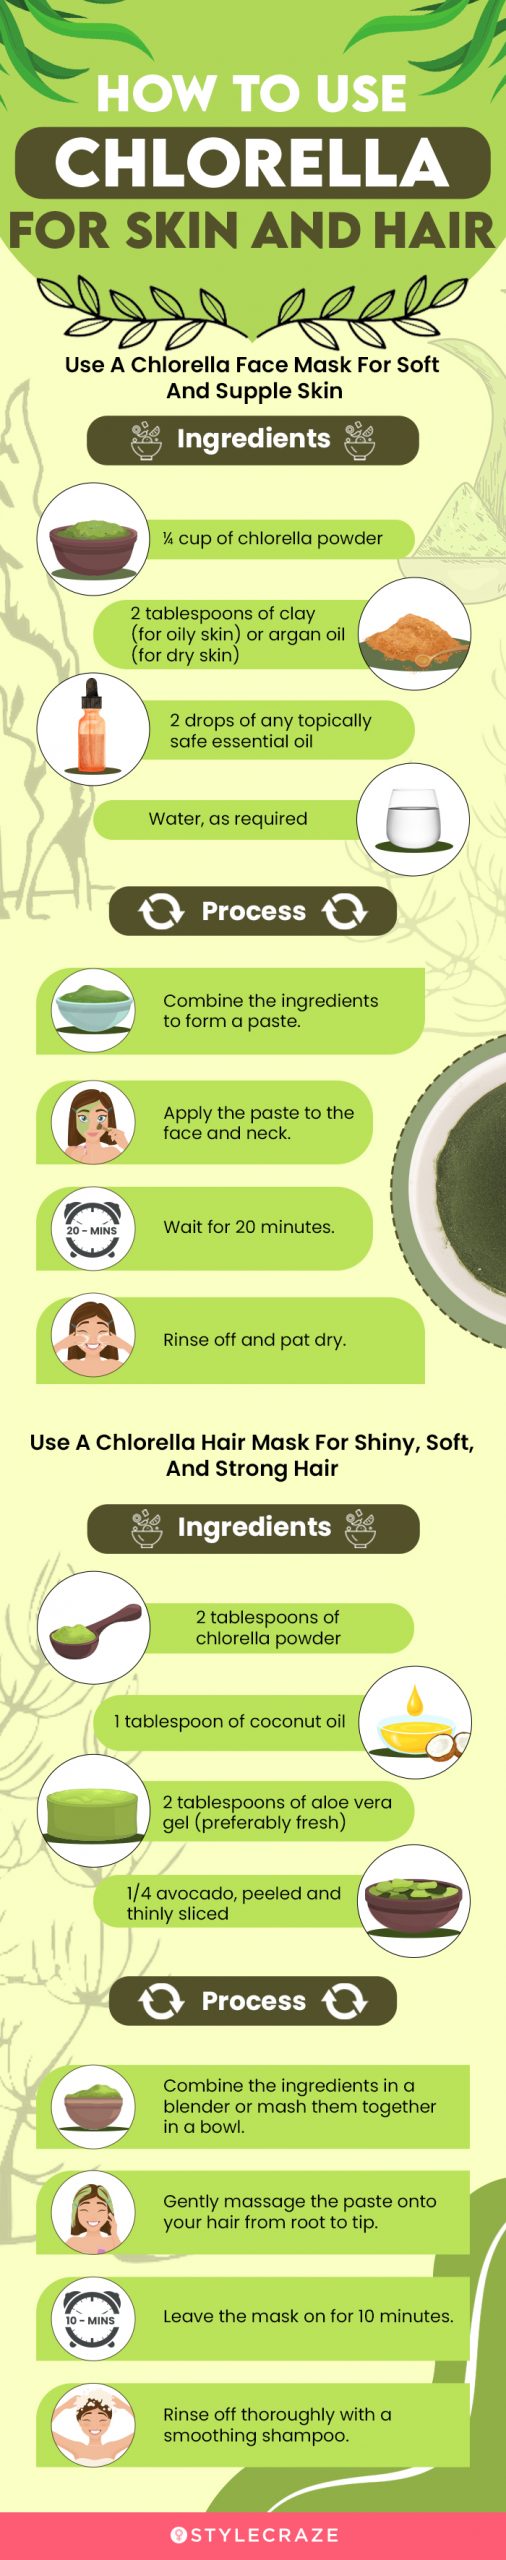 how to use chlorella for skin and hair (infographic)